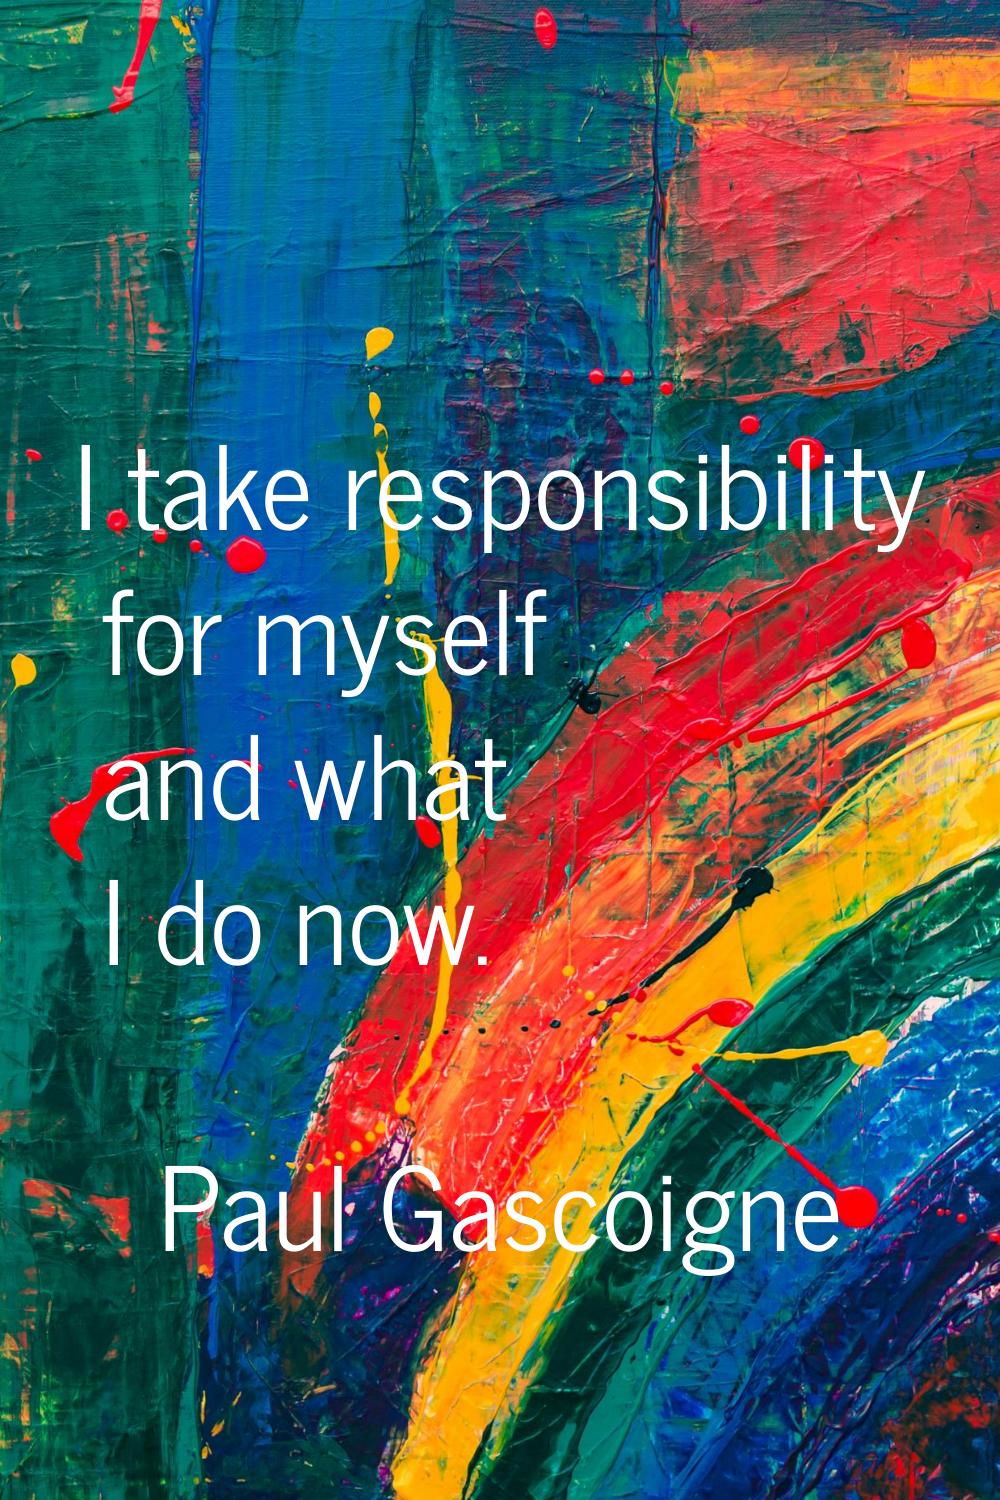 I take responsibility for myself and what I do now.